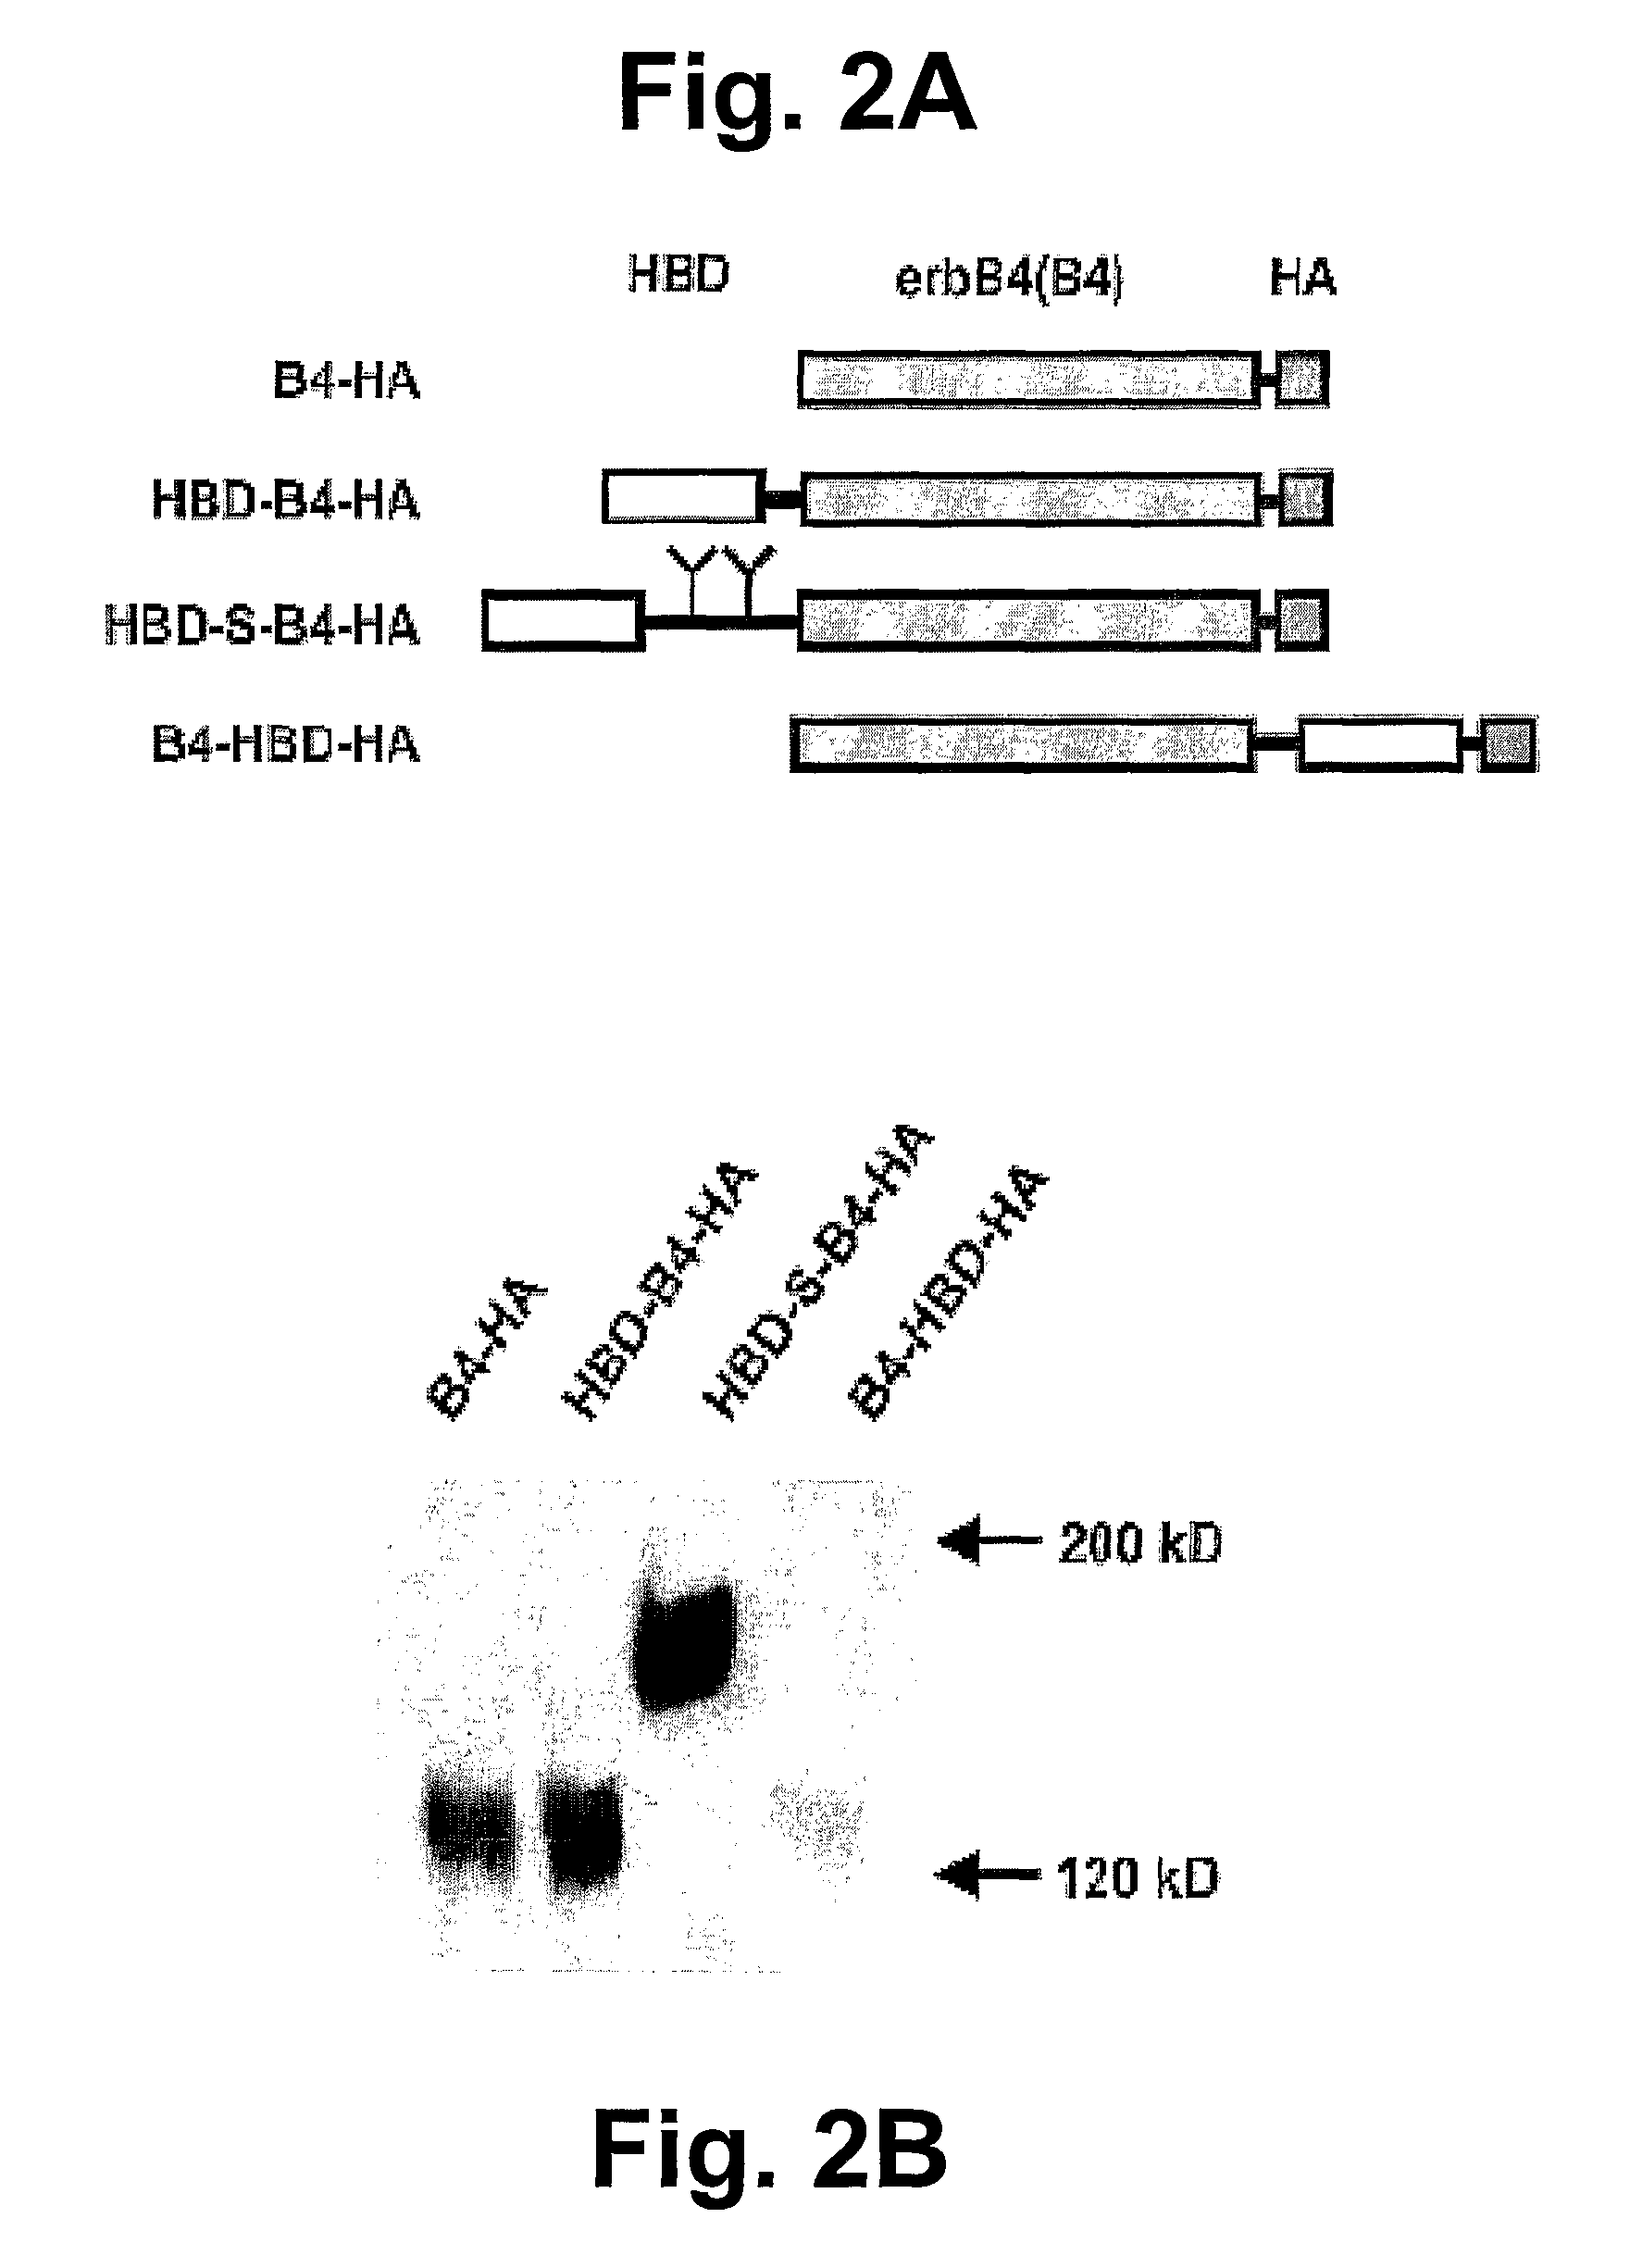 Hybrid proteins with ErbB4 extracellular domain and neuregulin heparin-binding domain for targeting